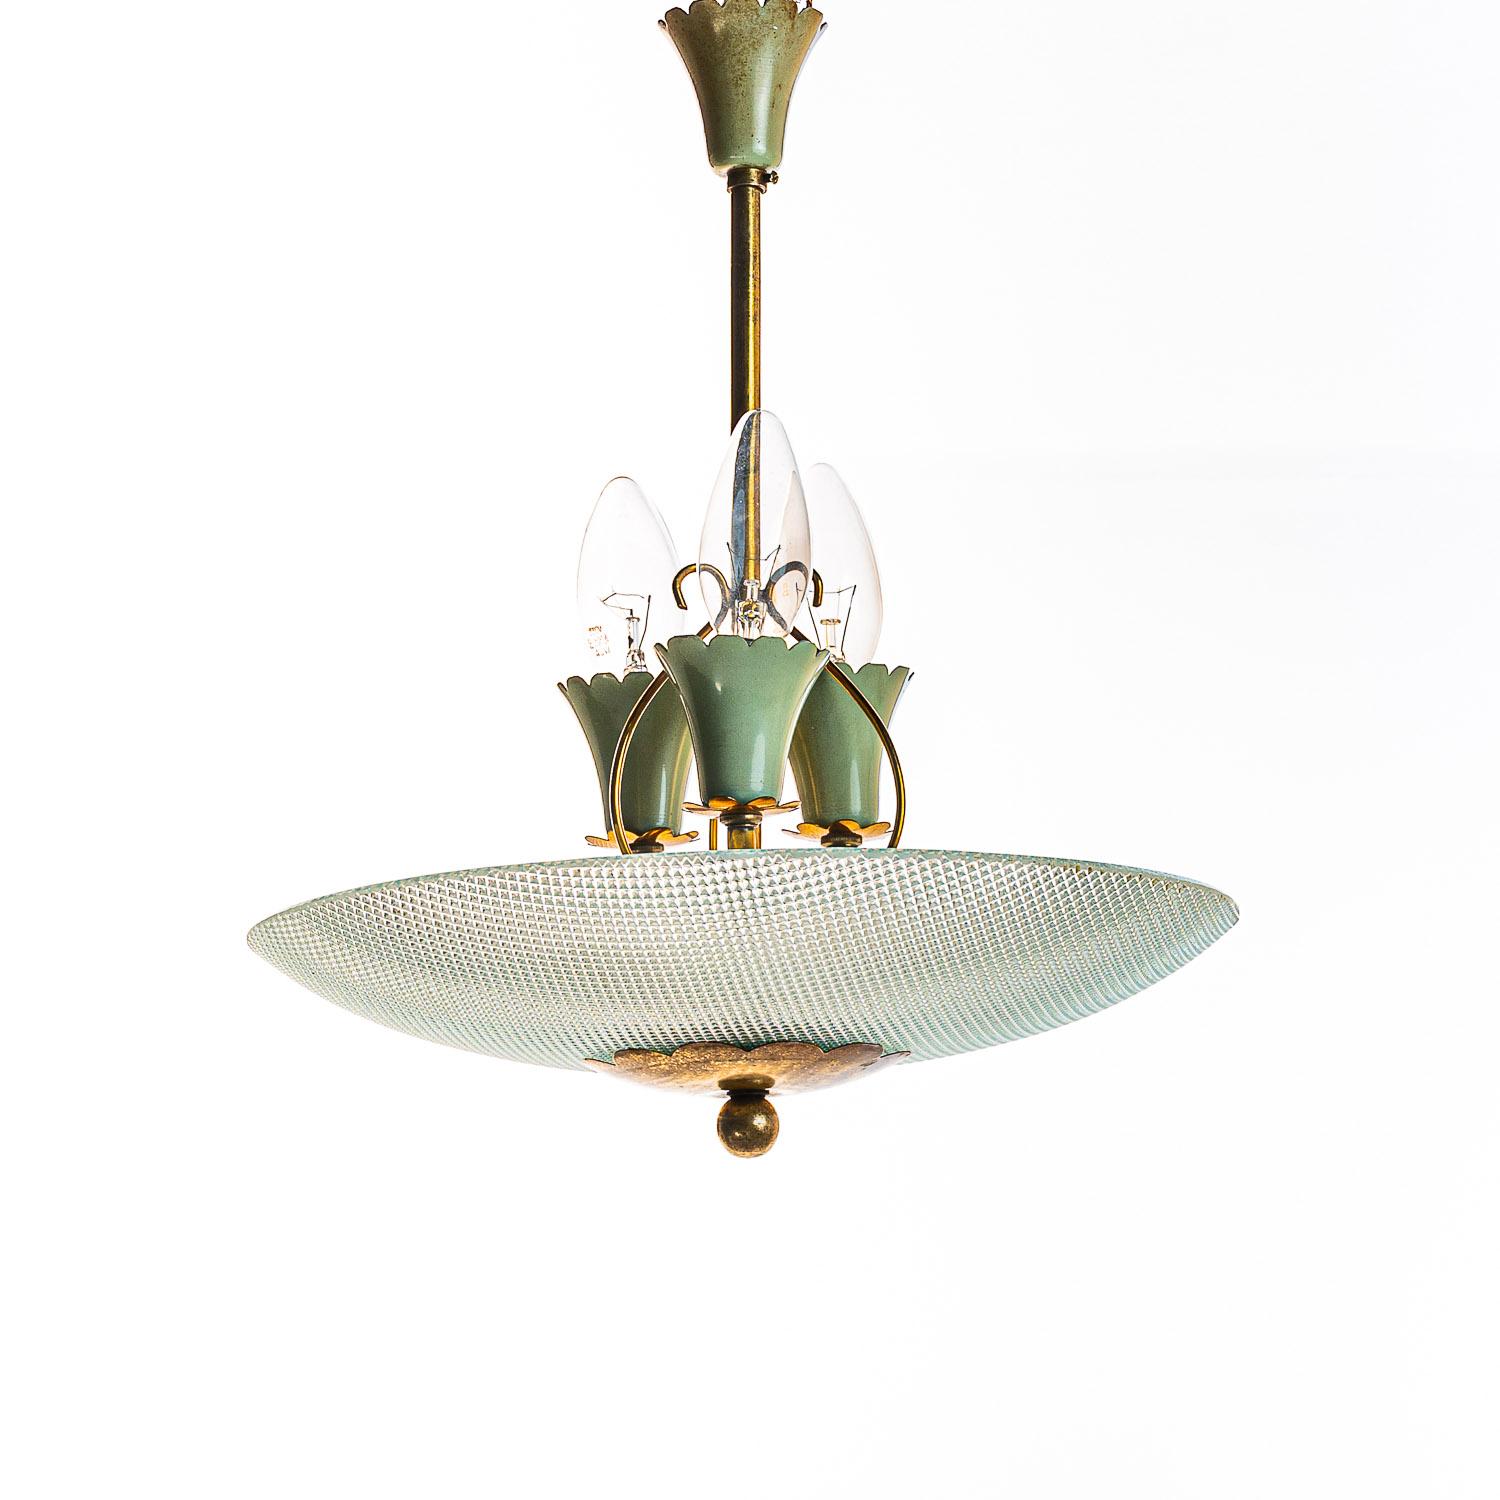 This elegant piece consisting of a brass frame and a unique ribbed glass reflector. 
The round ribbed glass reflector mounts below 3 green electrical E14 sockets. Brass hardware and stem. A elegant feature with soft light. 

Please note, we have